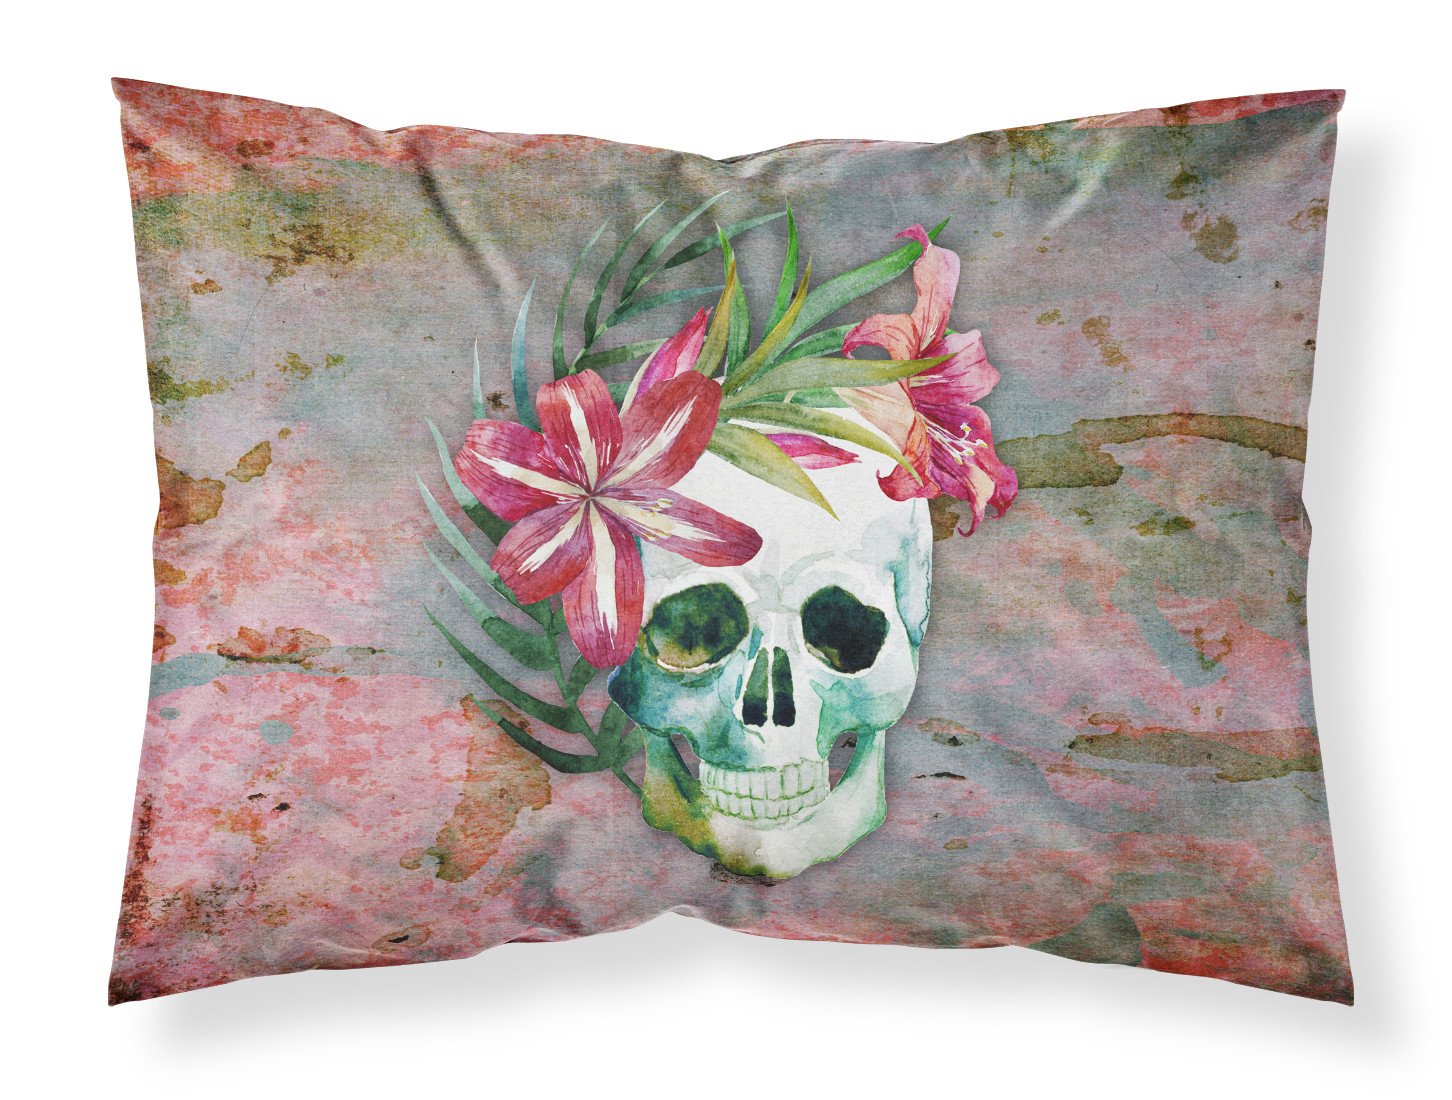 Day of the Dead Skull Flowers Fabric Standard Pillowcase BB5125PILLOWCASE by Caroline's Treasures